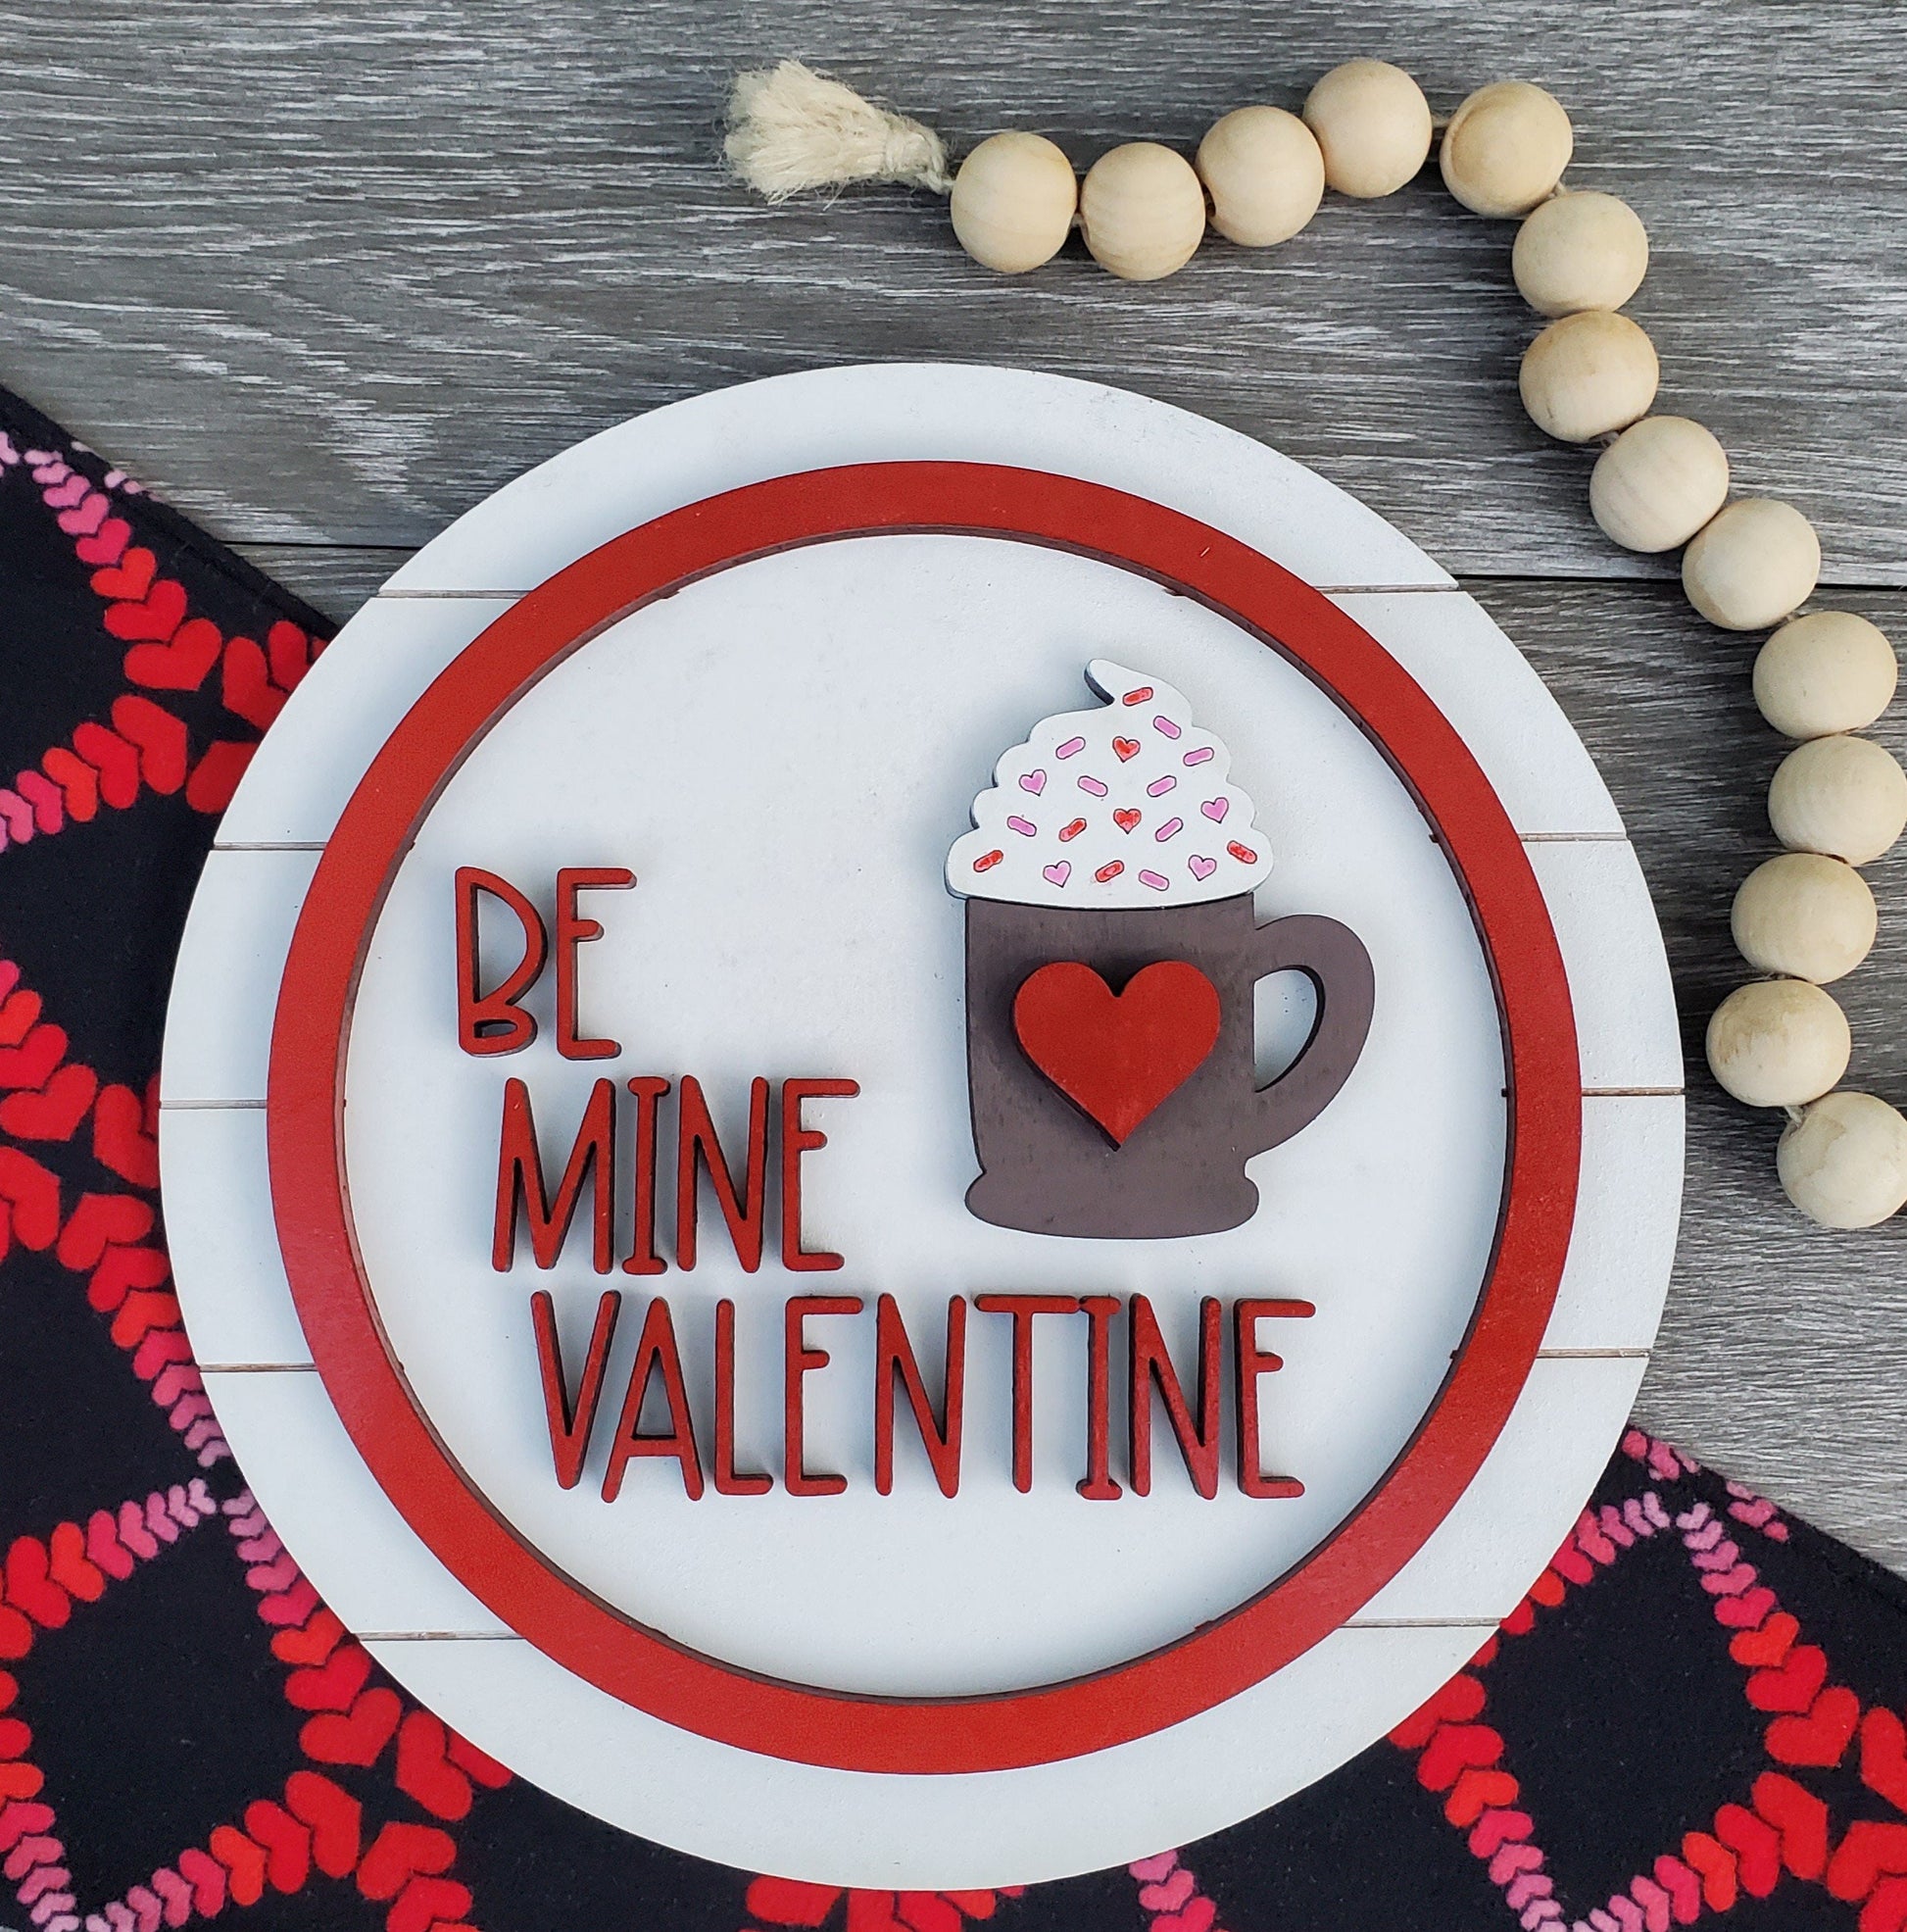 Be Mine Valentine Latte Shiplap Shelf Sitter - Round and Square Frames - Files for Sign Making - SVG Cut File For Glowforge - Digital File